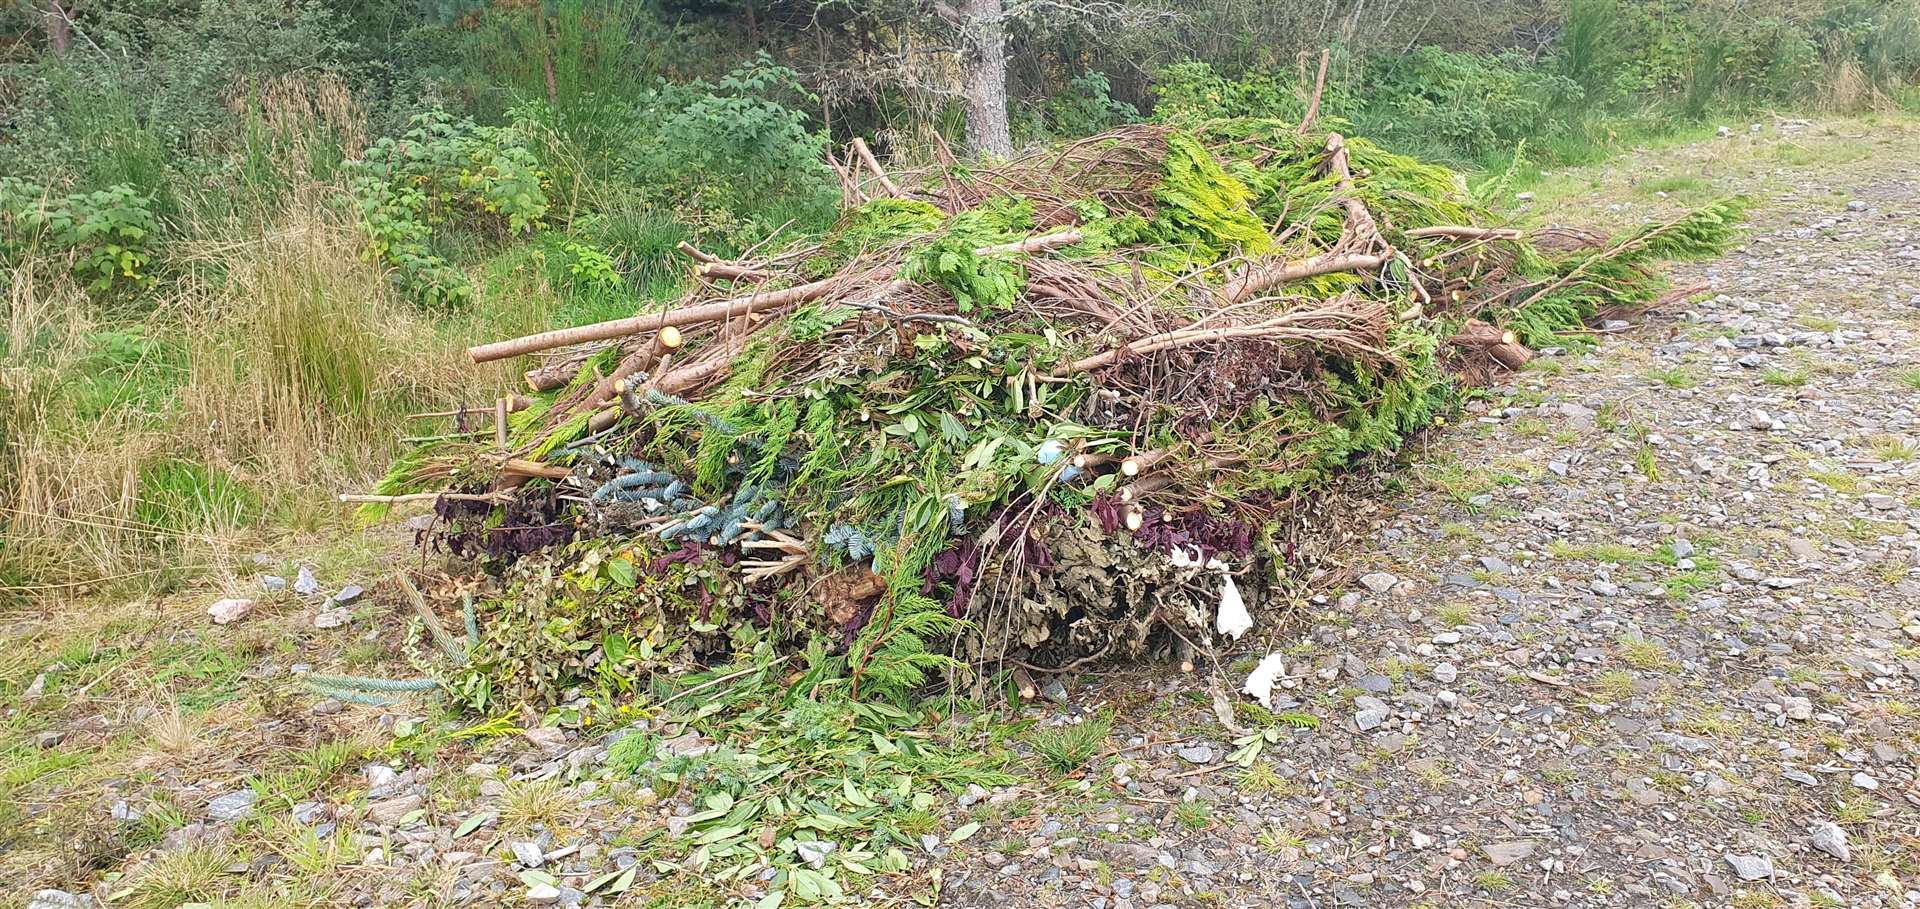 There have been problems with fly-tipping in the area around Moy.